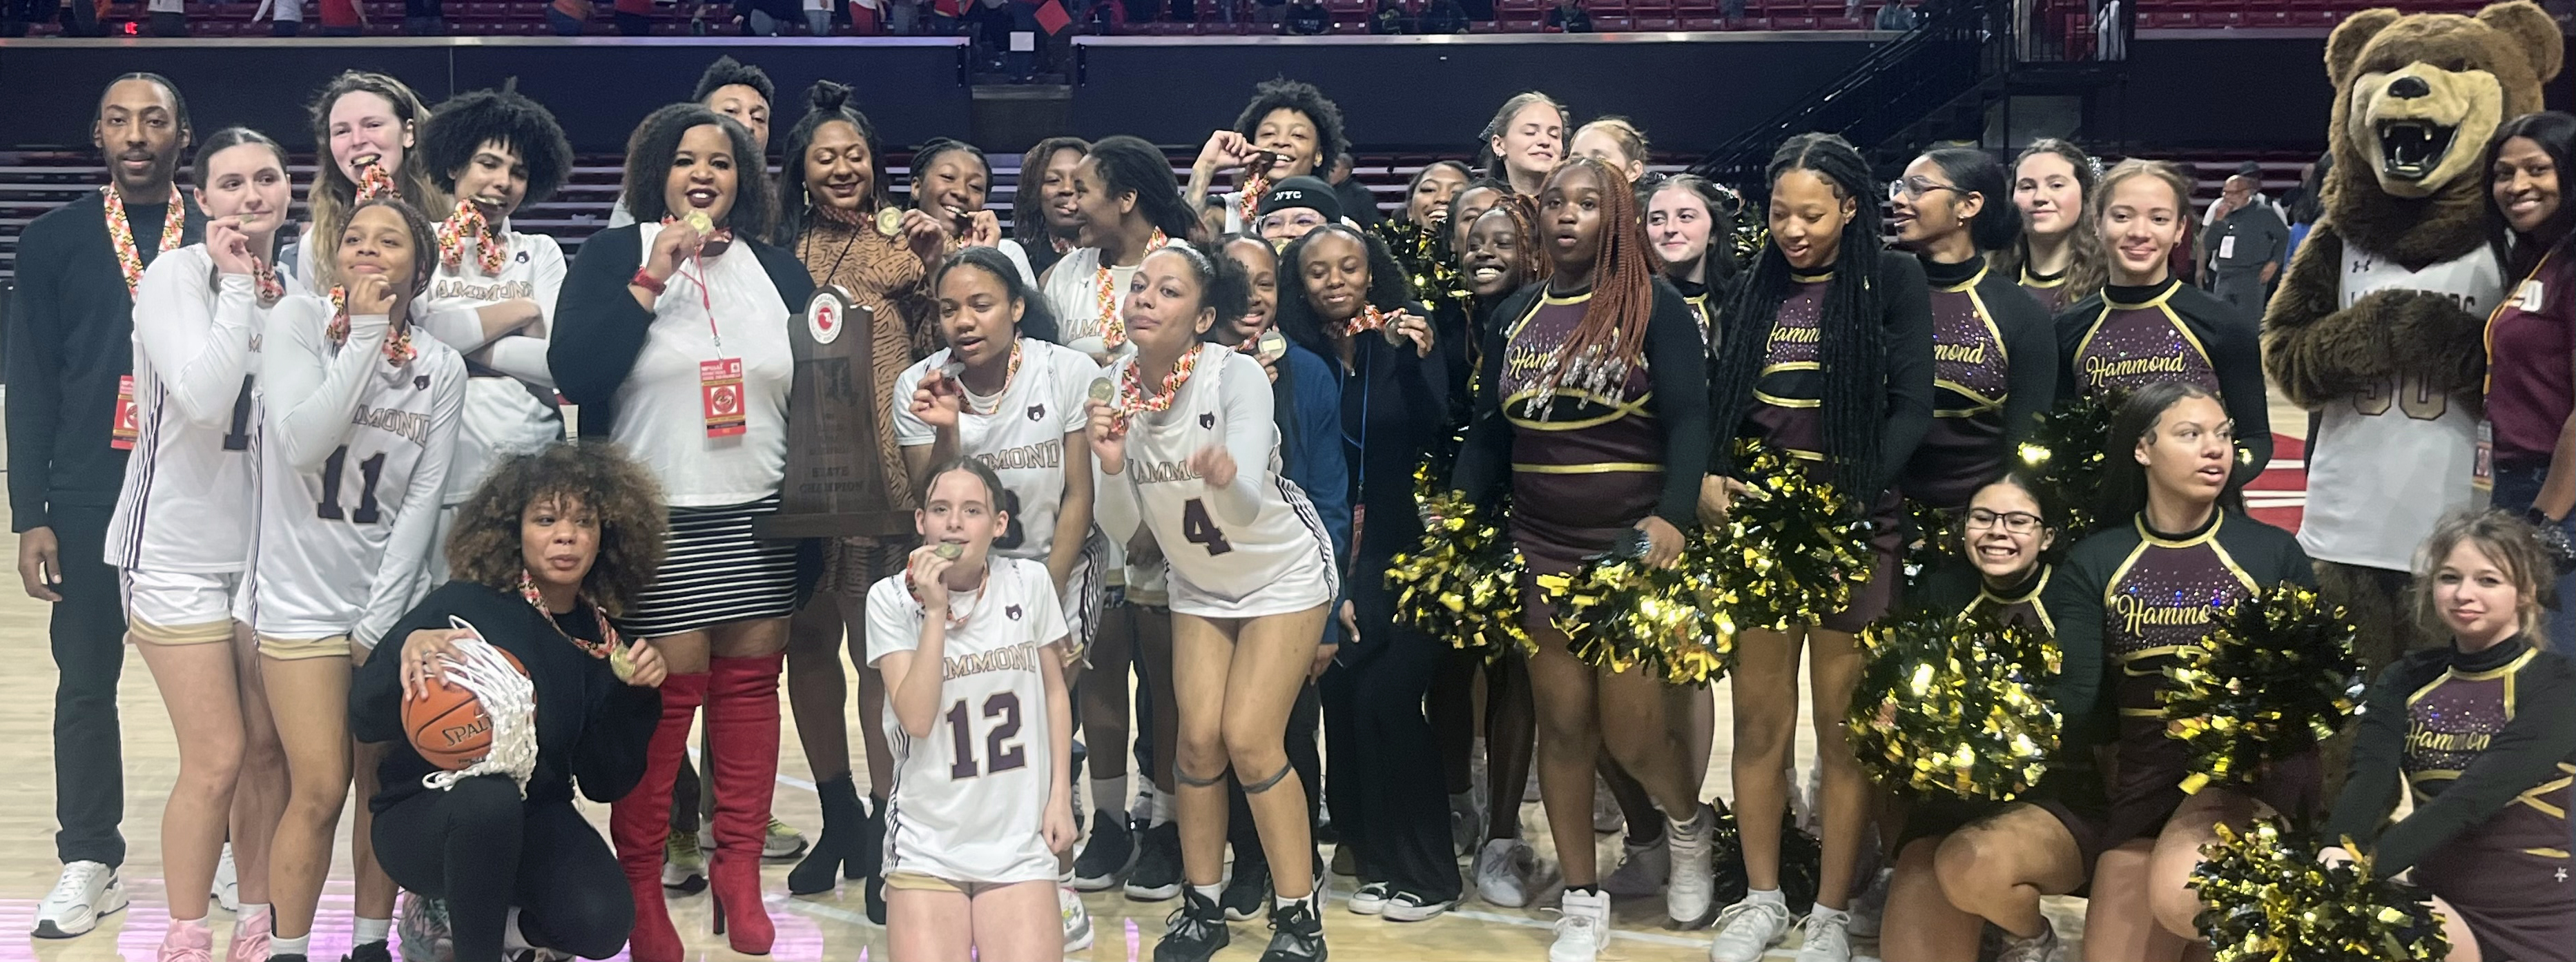 Hammond girls basketball completed a 27-0 season with the MPSSAA Class 2A state title Friday. The Bears defeated Francis Scott Key, 65-46, at the University of Maryland.